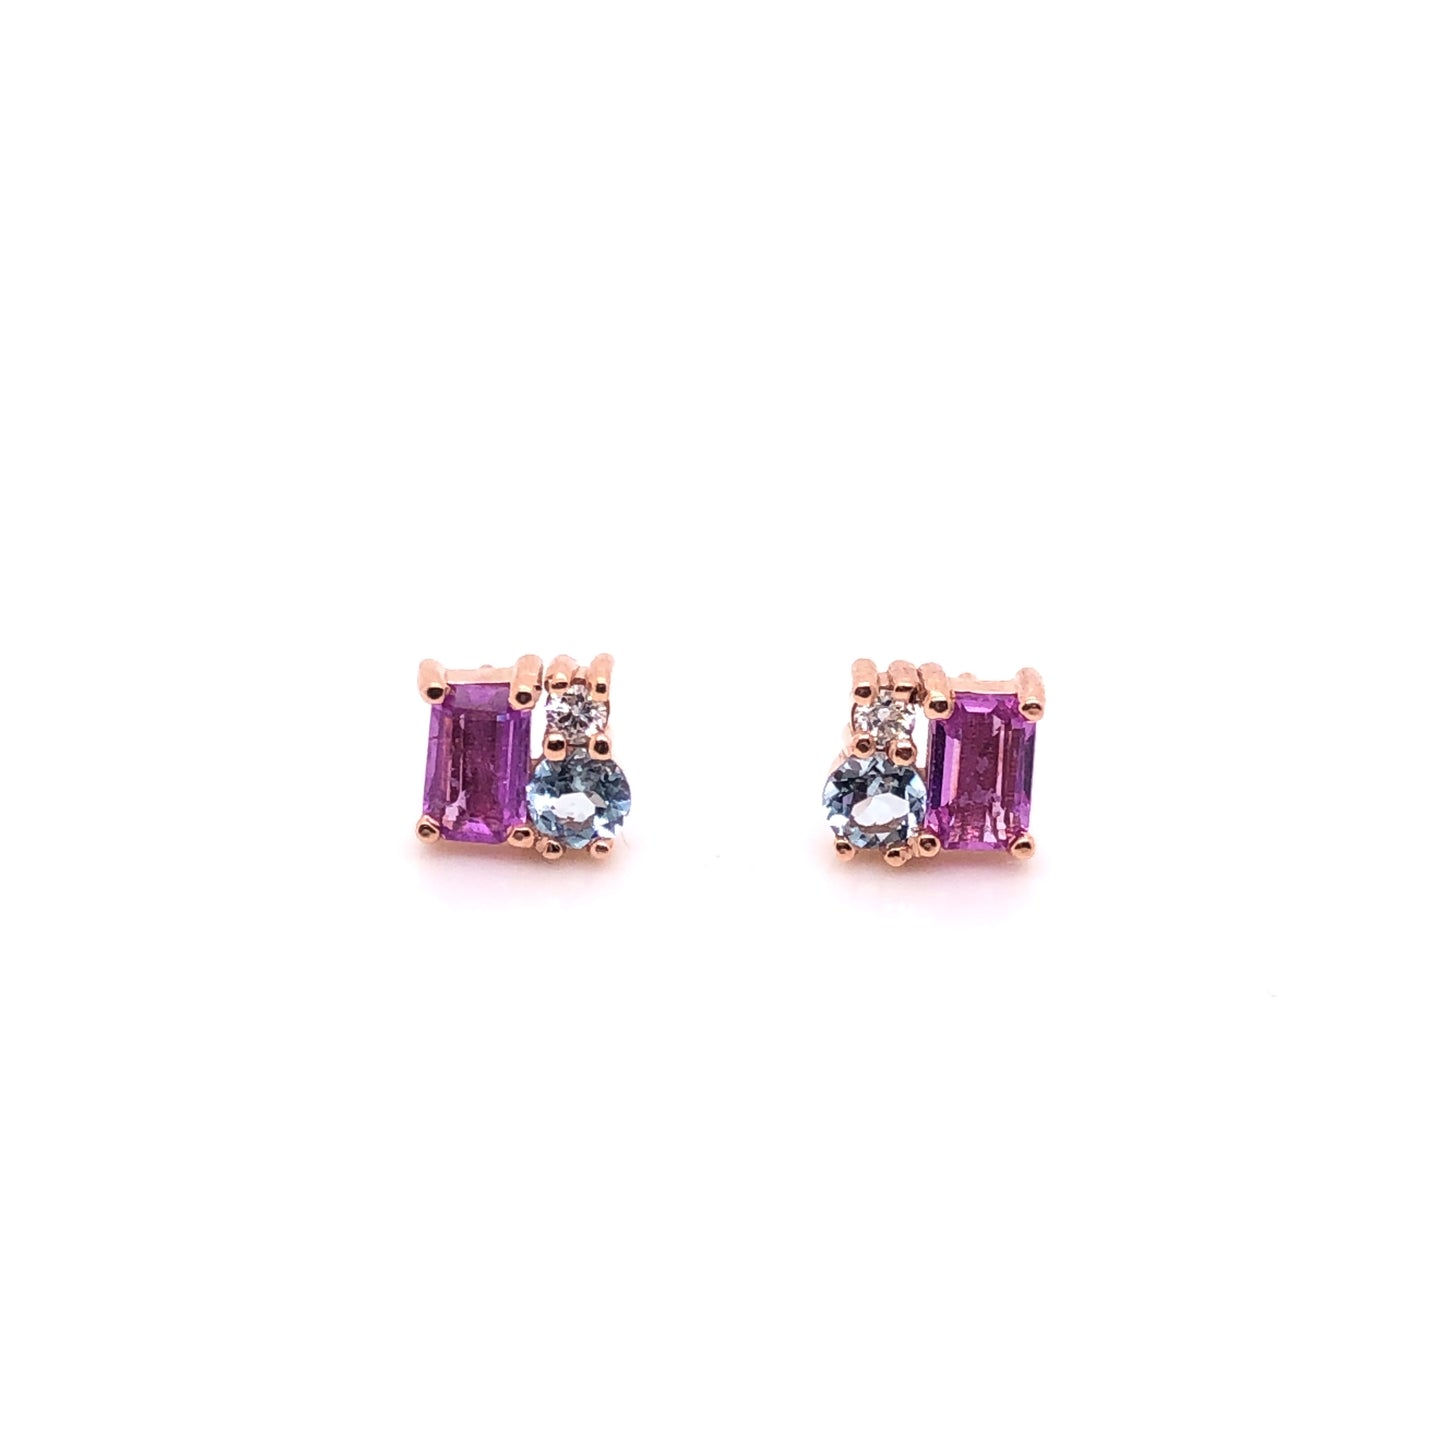 IMMEDIATE DELIVERY / Purple Sapphire, Aquamarine and Diamond Earrings / 14k Rose Gold / Pair